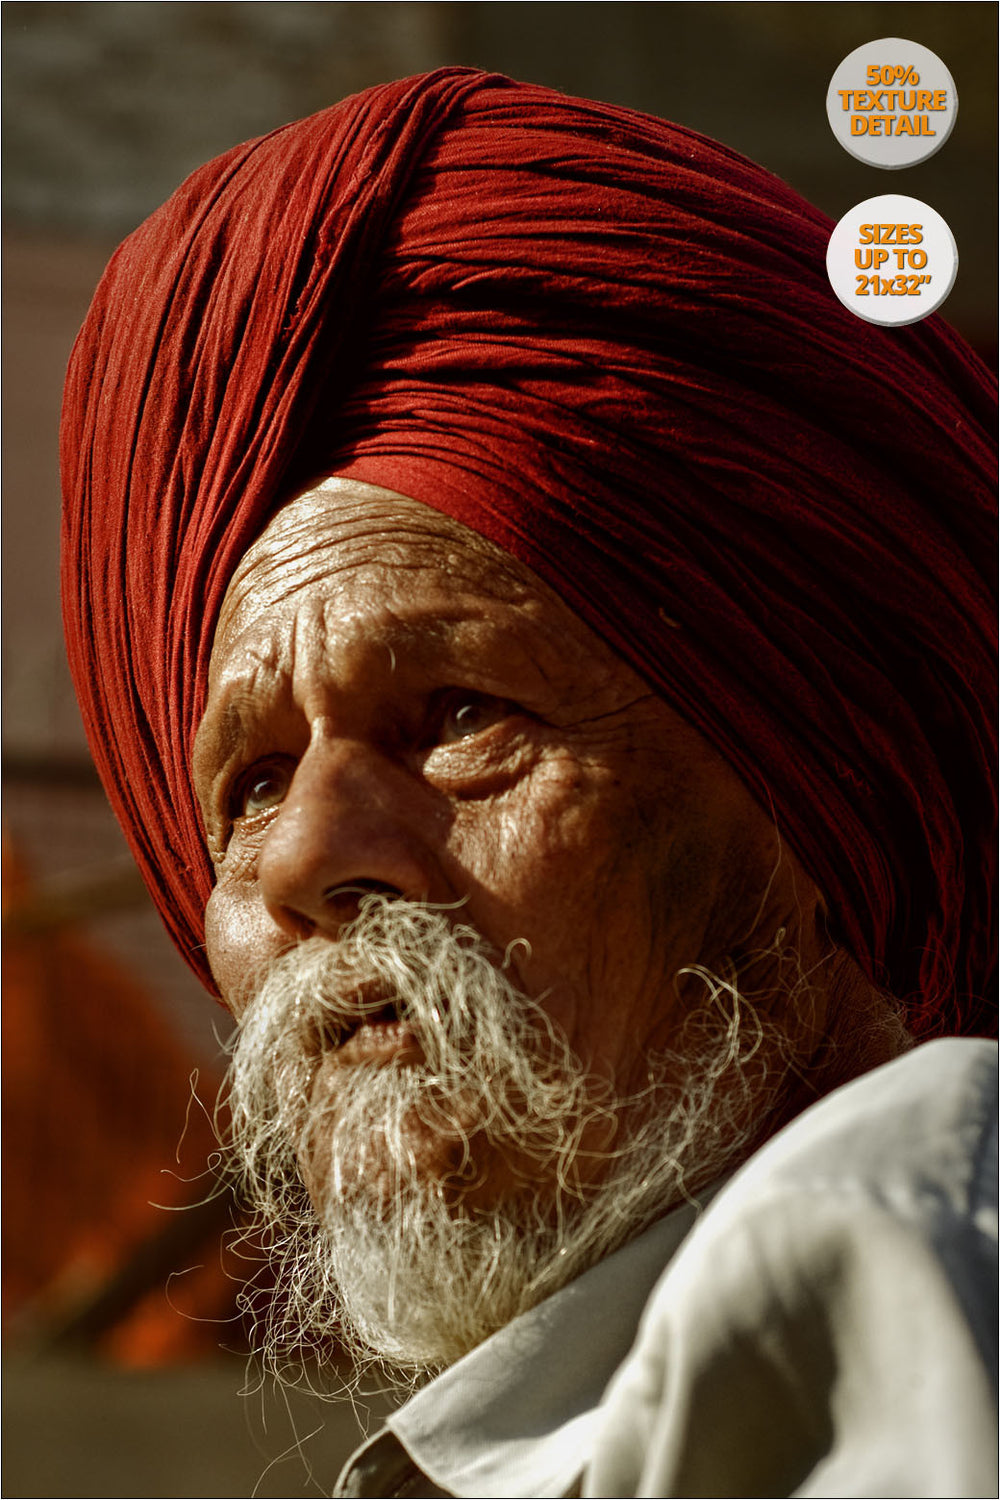 Portrait of a Sikh, Chandigarh, India. | 50% Magnification Detail View.